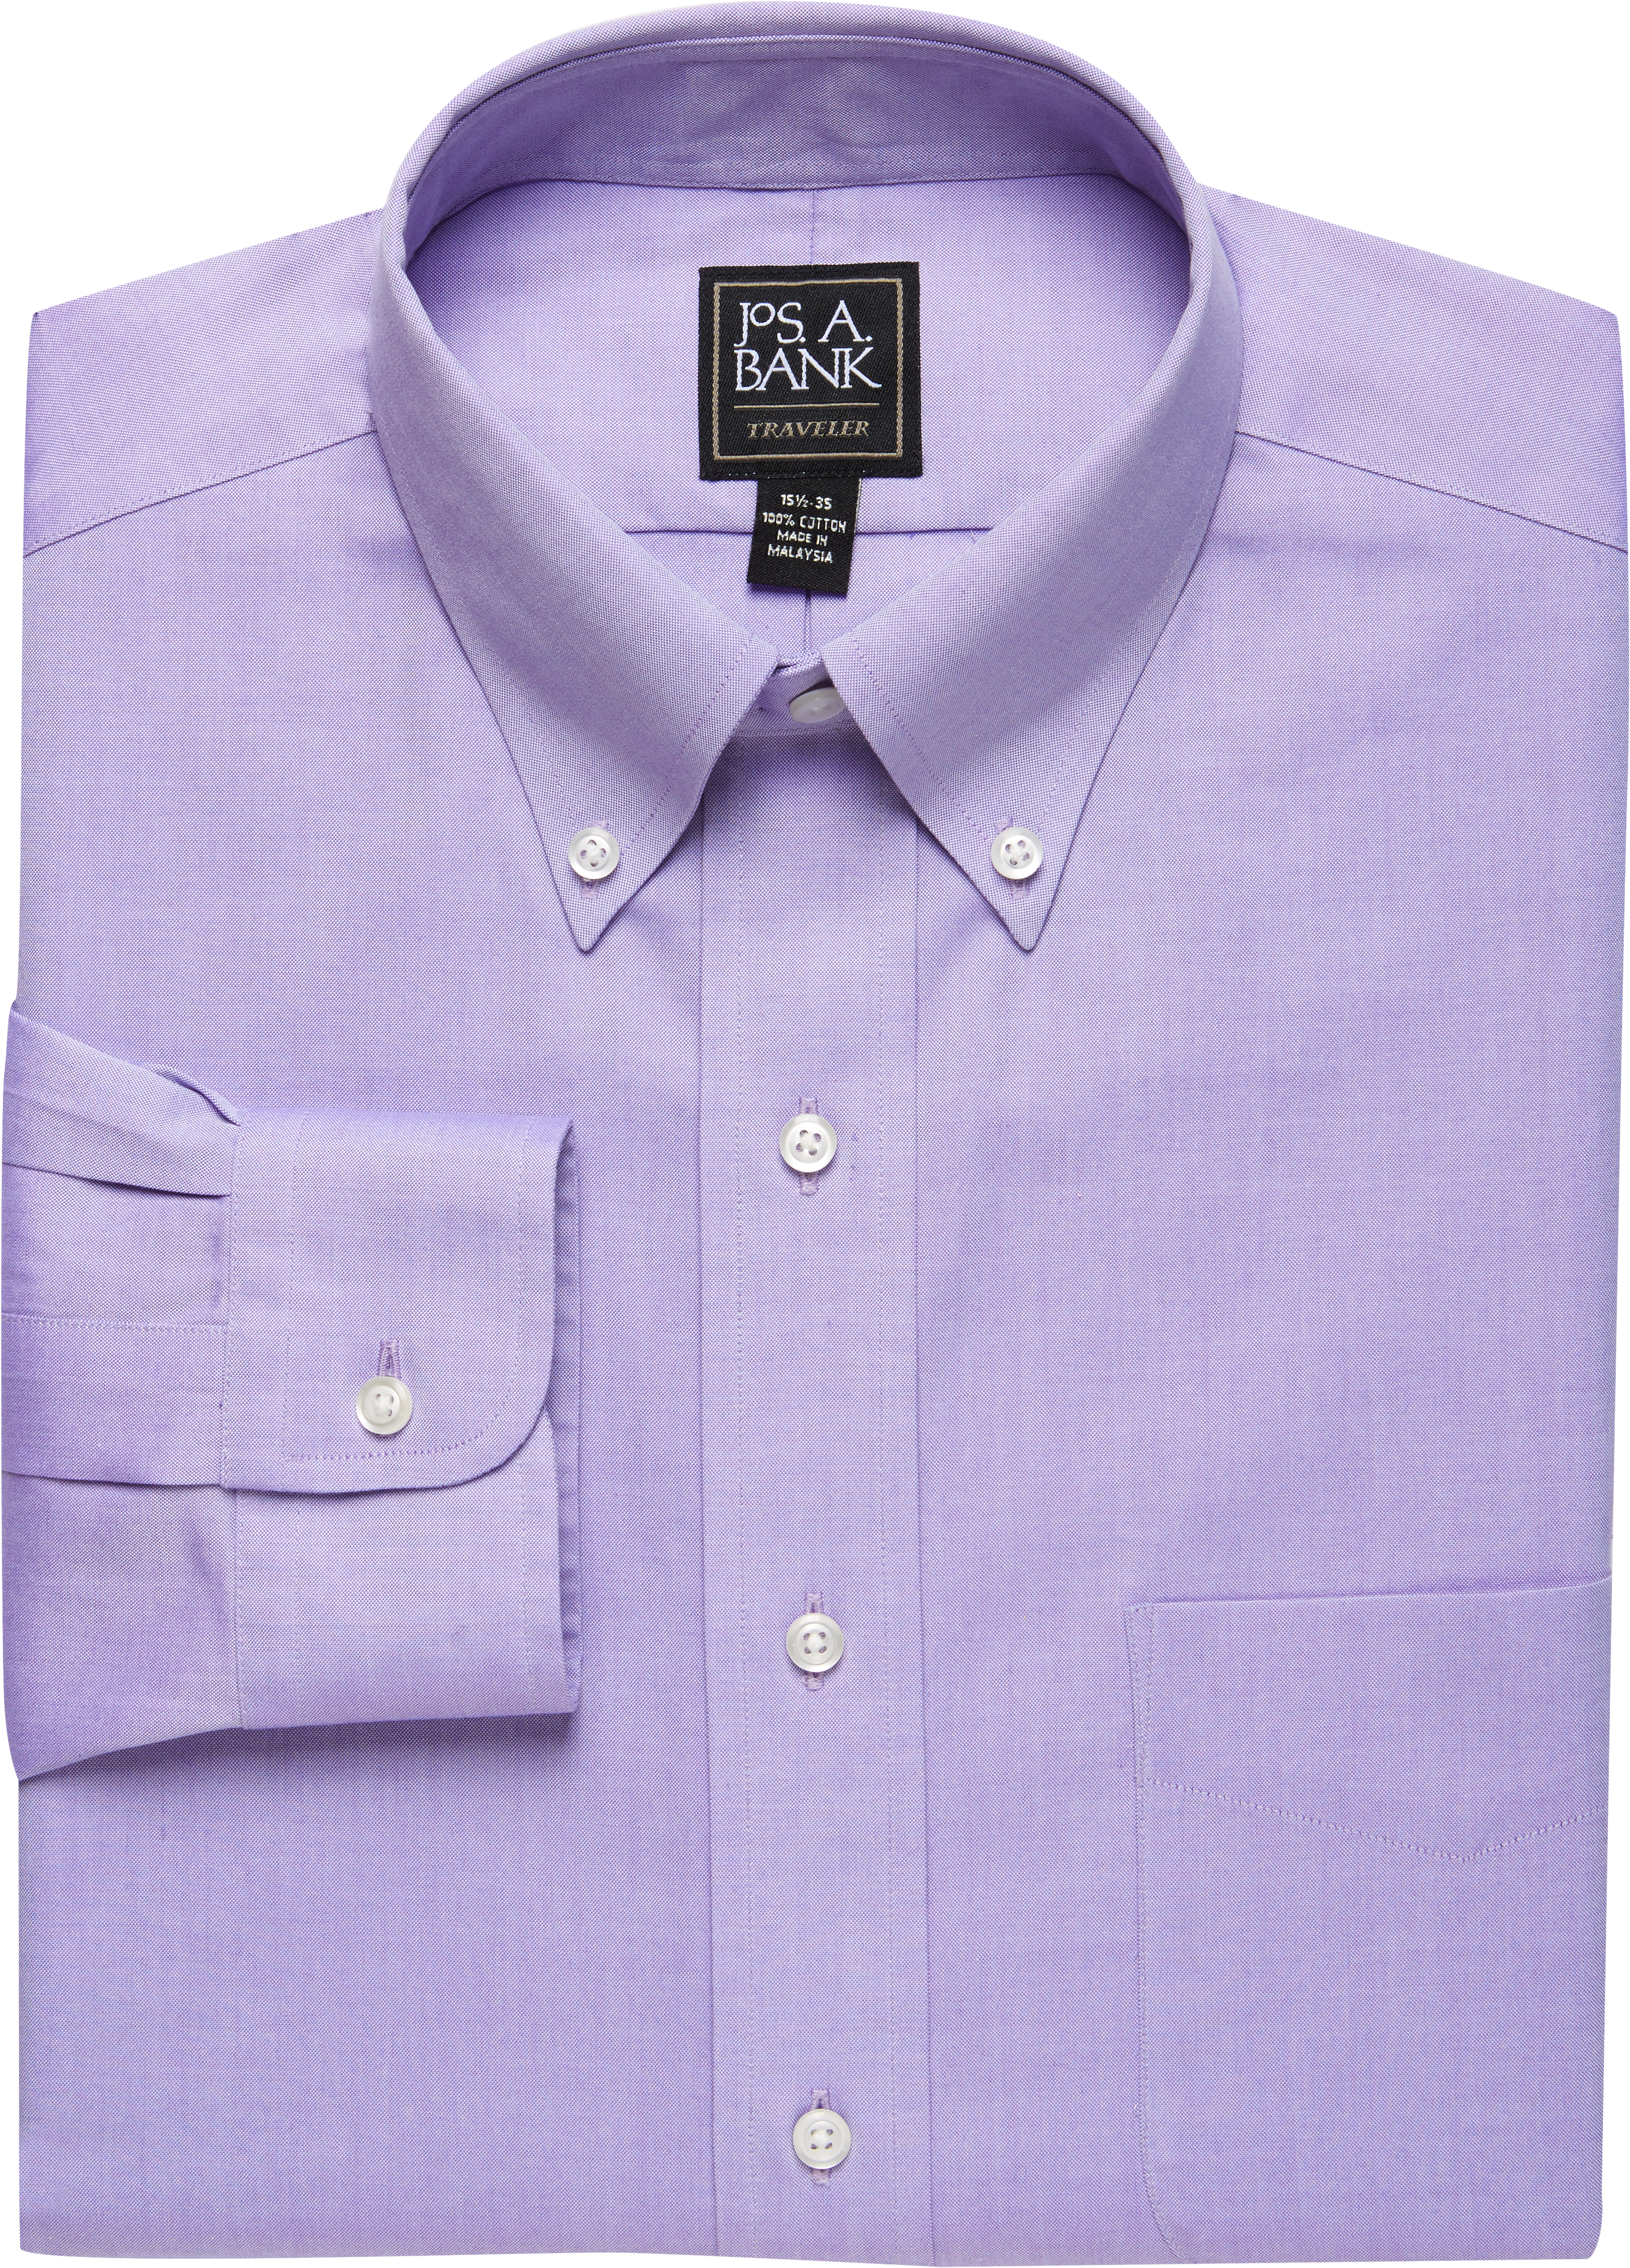 Things We Love - The J Press OCBD Flap Pocket Shirt  St Johns Fragrance Co  LLC™ Things We Love The things we love that stand the test of time or are